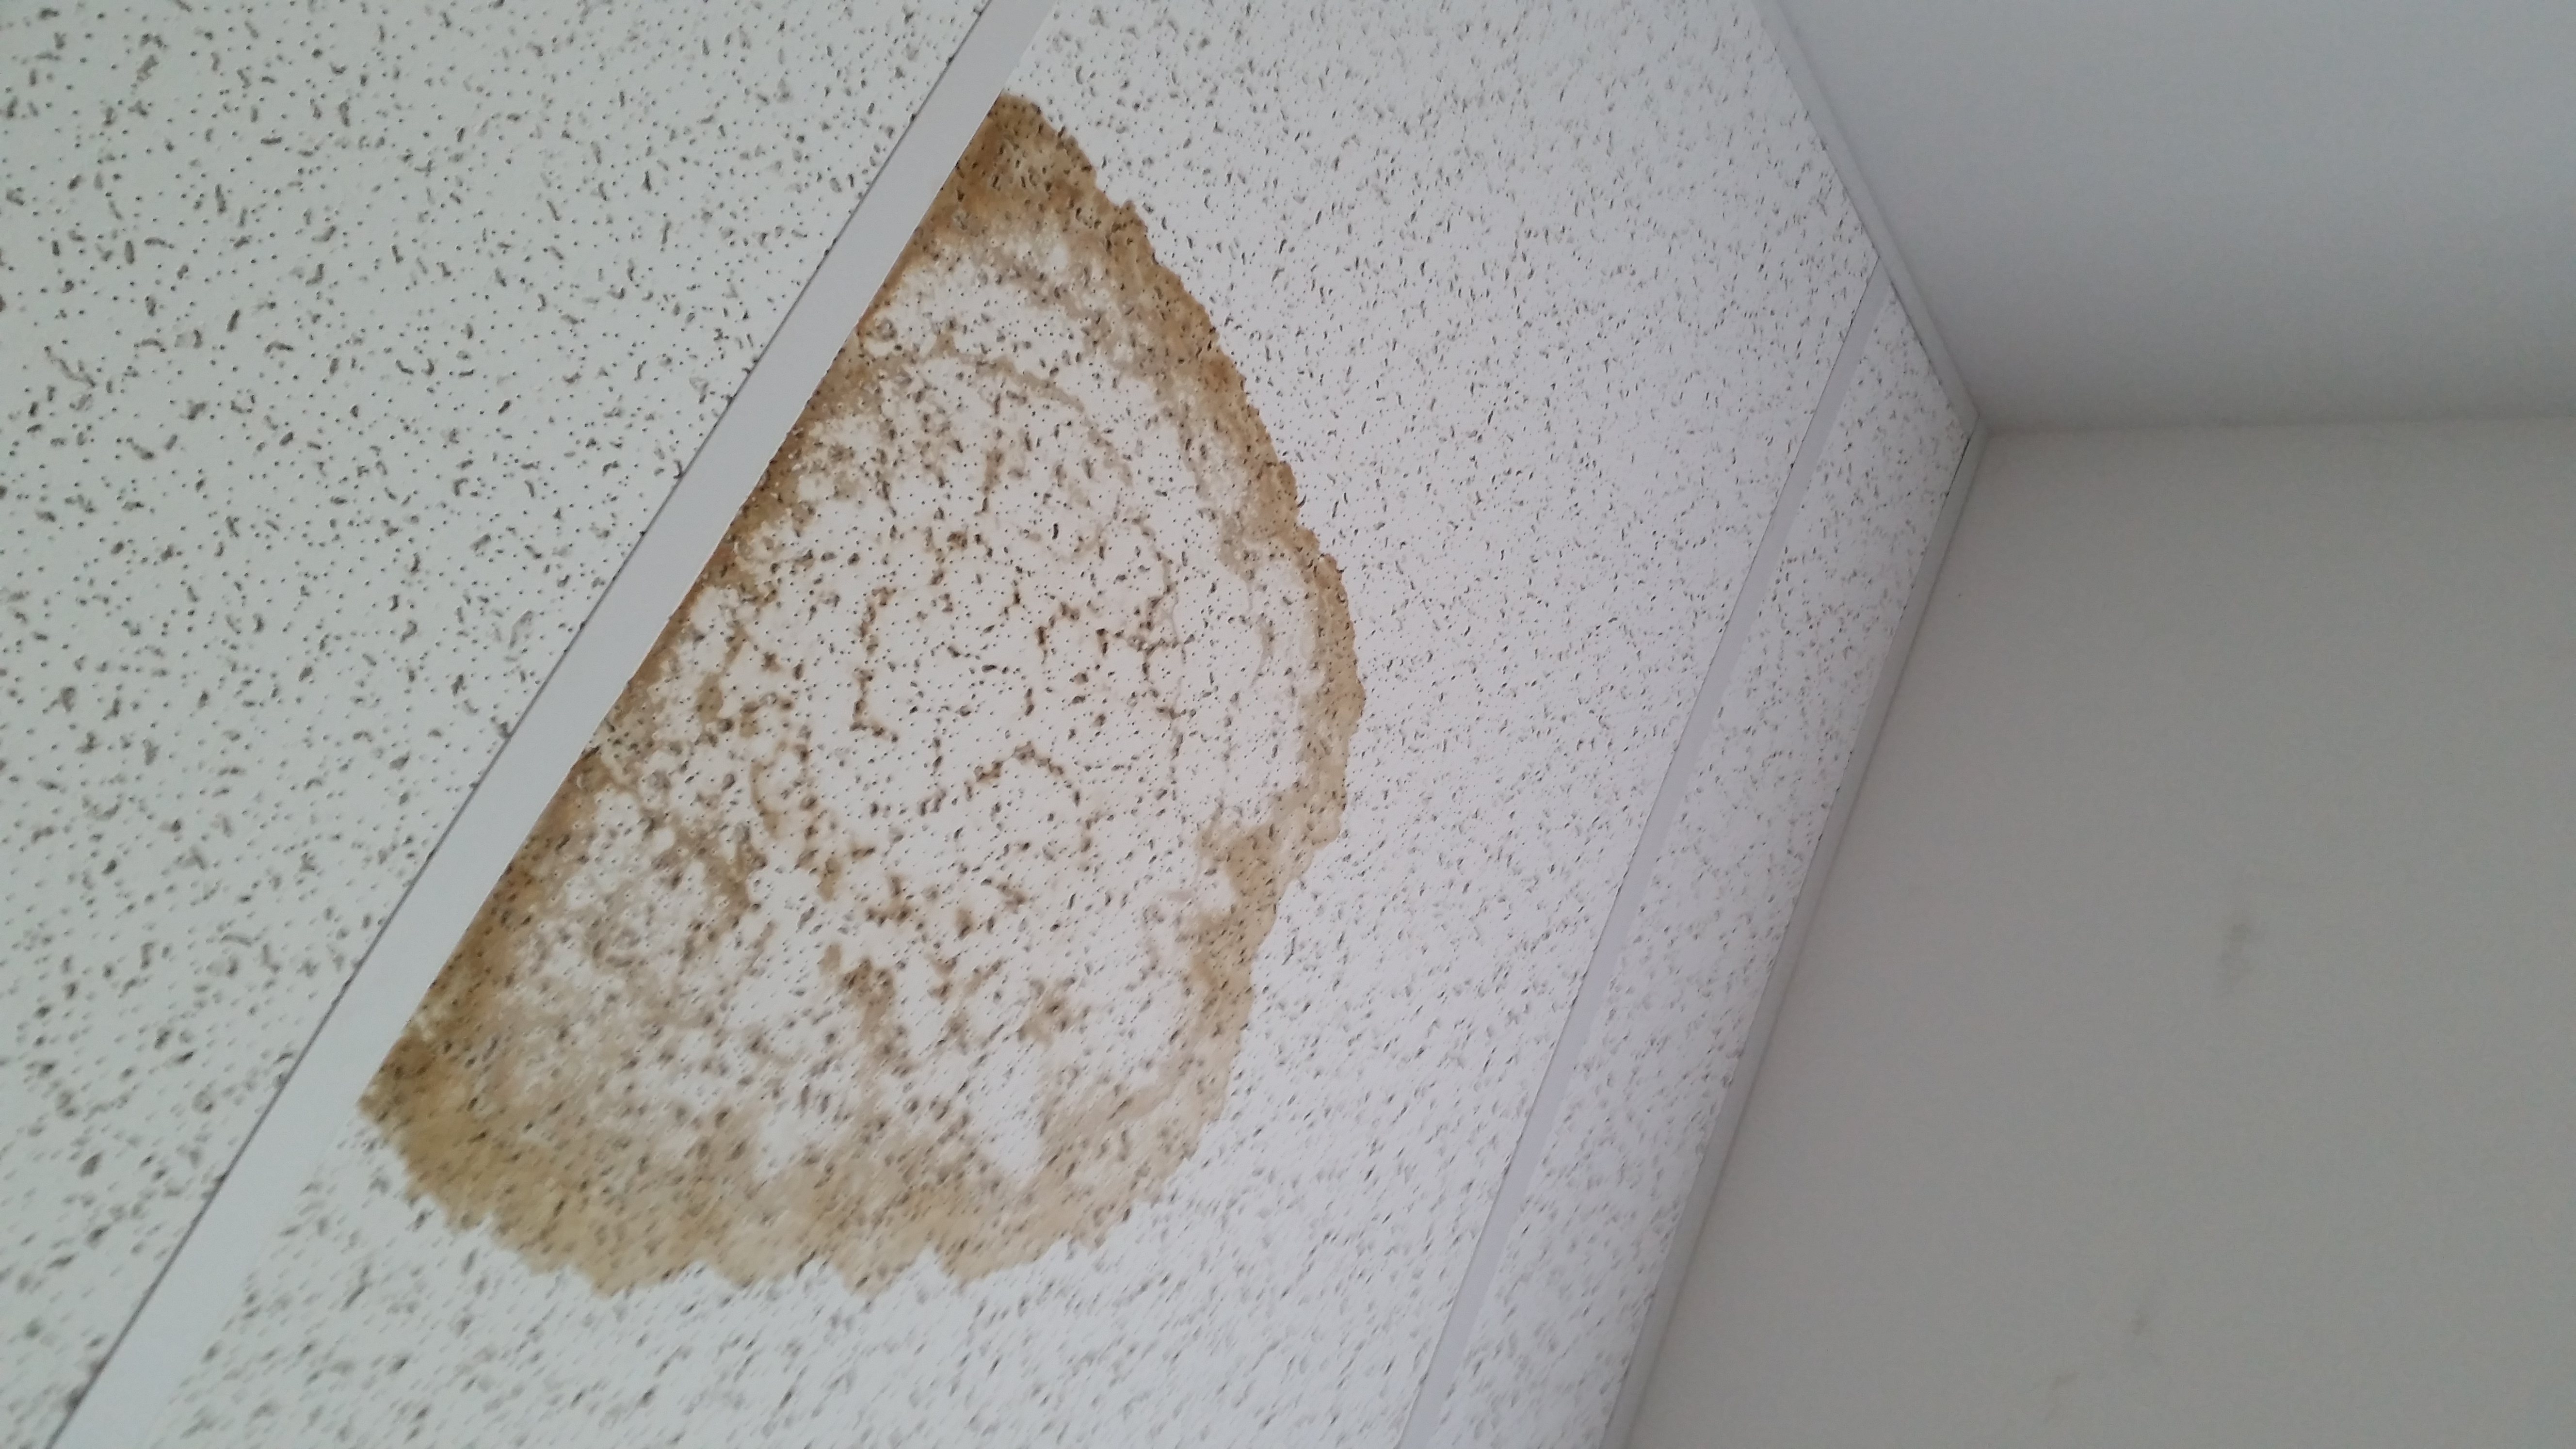 Another water spot ruining our ceiling.   We have multiple leaks not fixed in out roof.